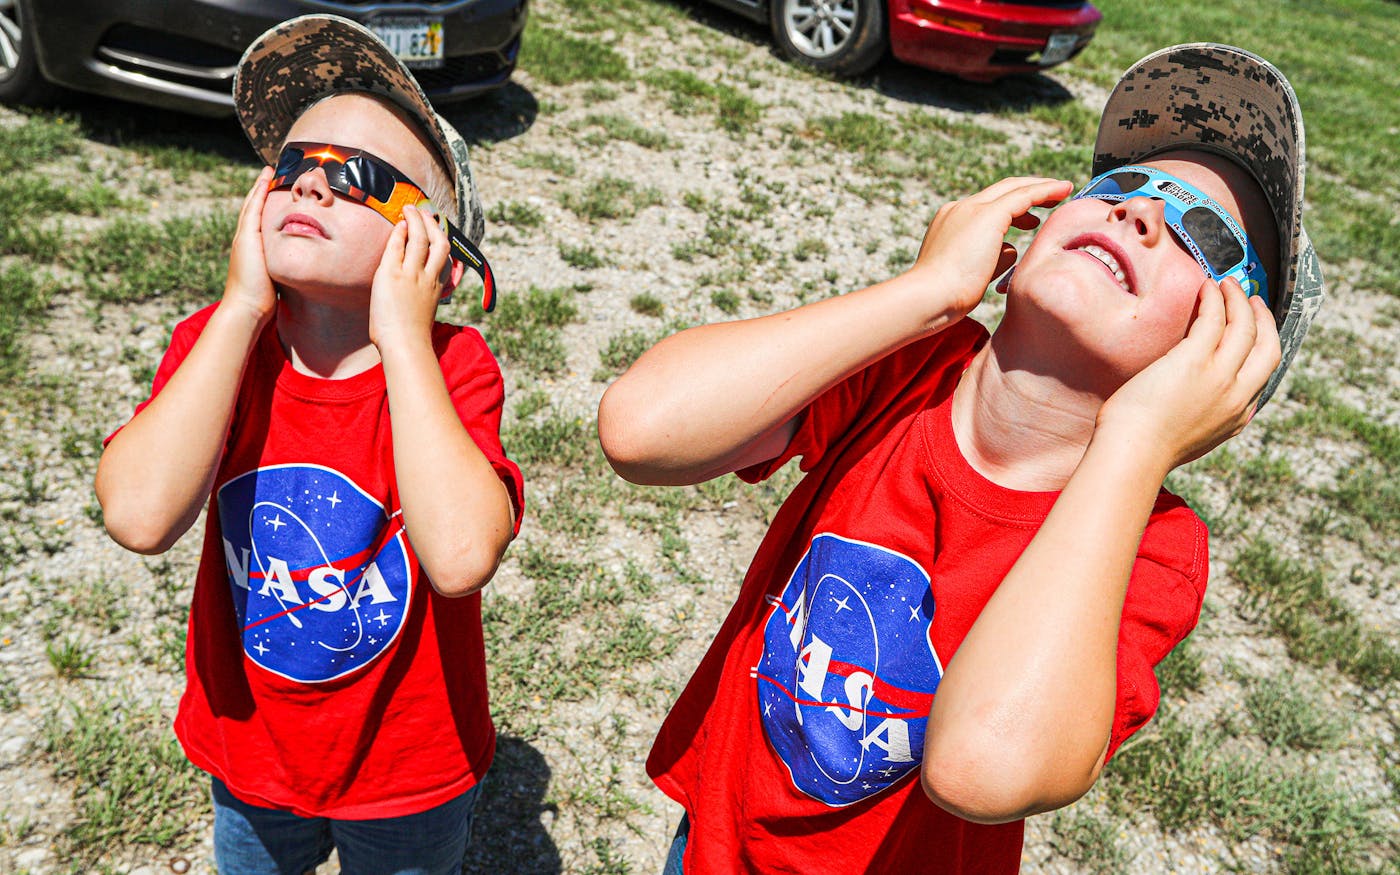 Thousands wait in line for last chance to score eclipse glasses